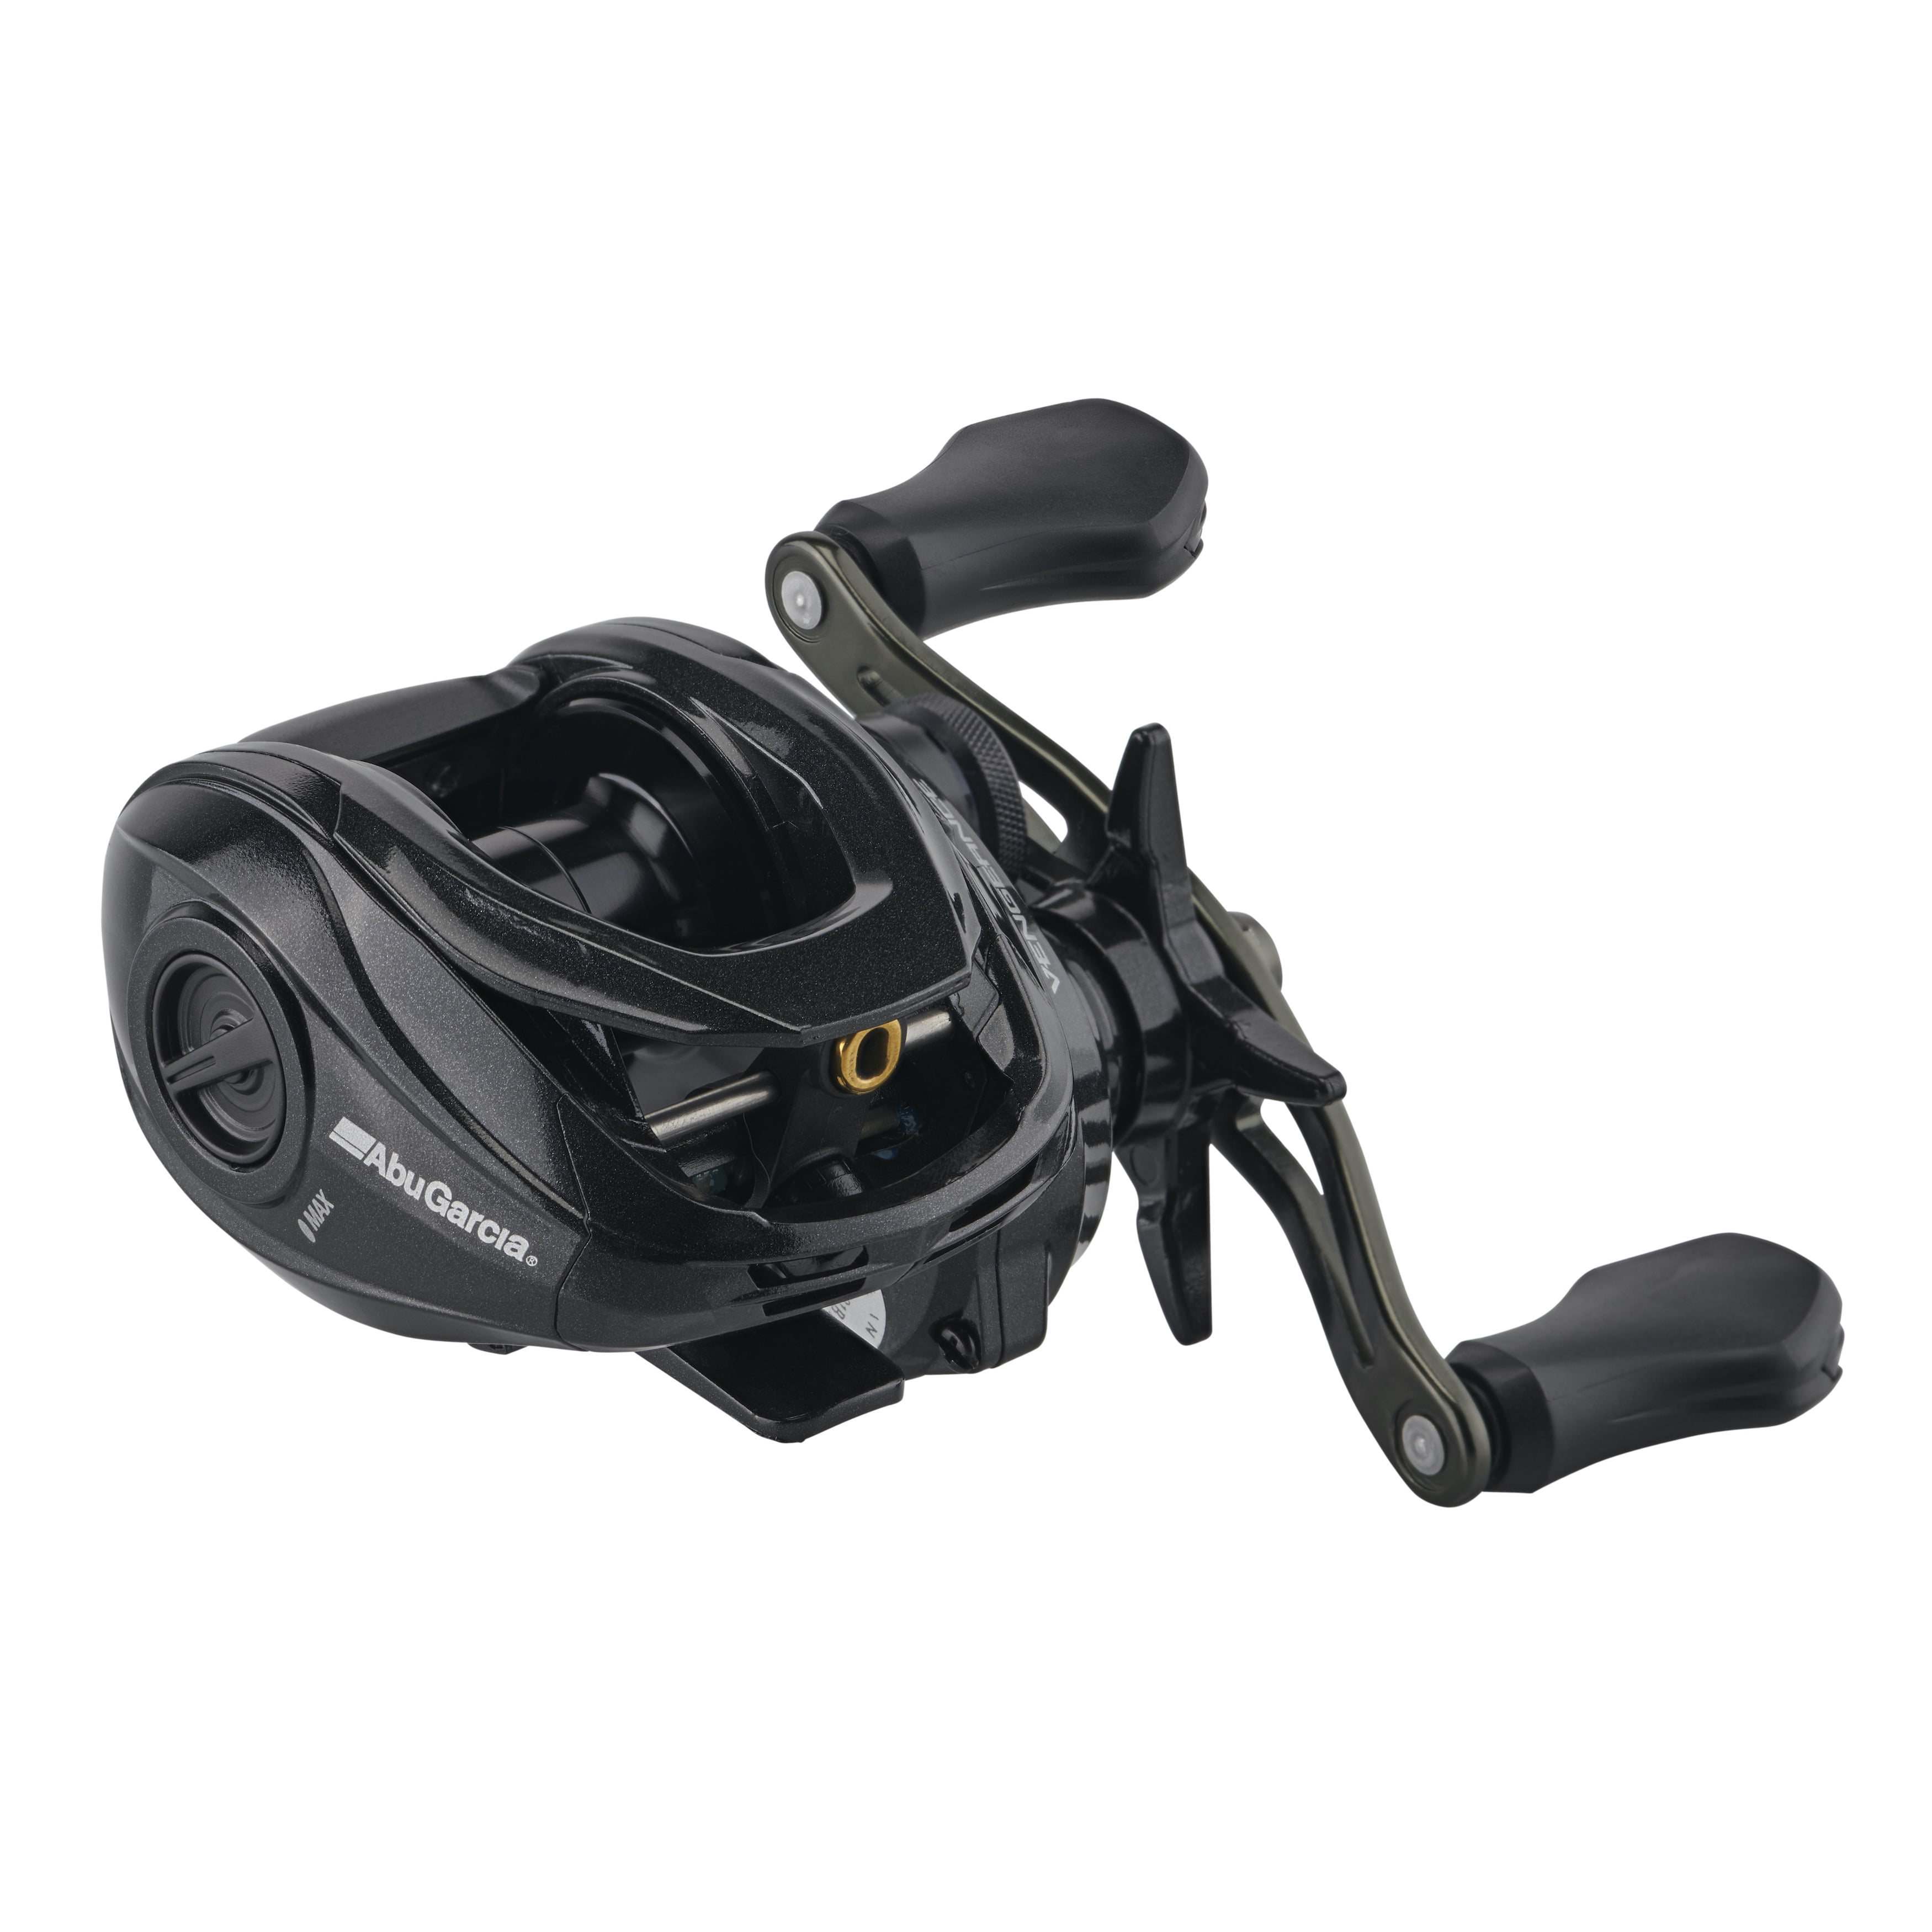 Penn Squall SQL300LPLH Baitcasting Fishing Reel - Left Hand for Sale in La  Habra Heights, CA - OfferUp